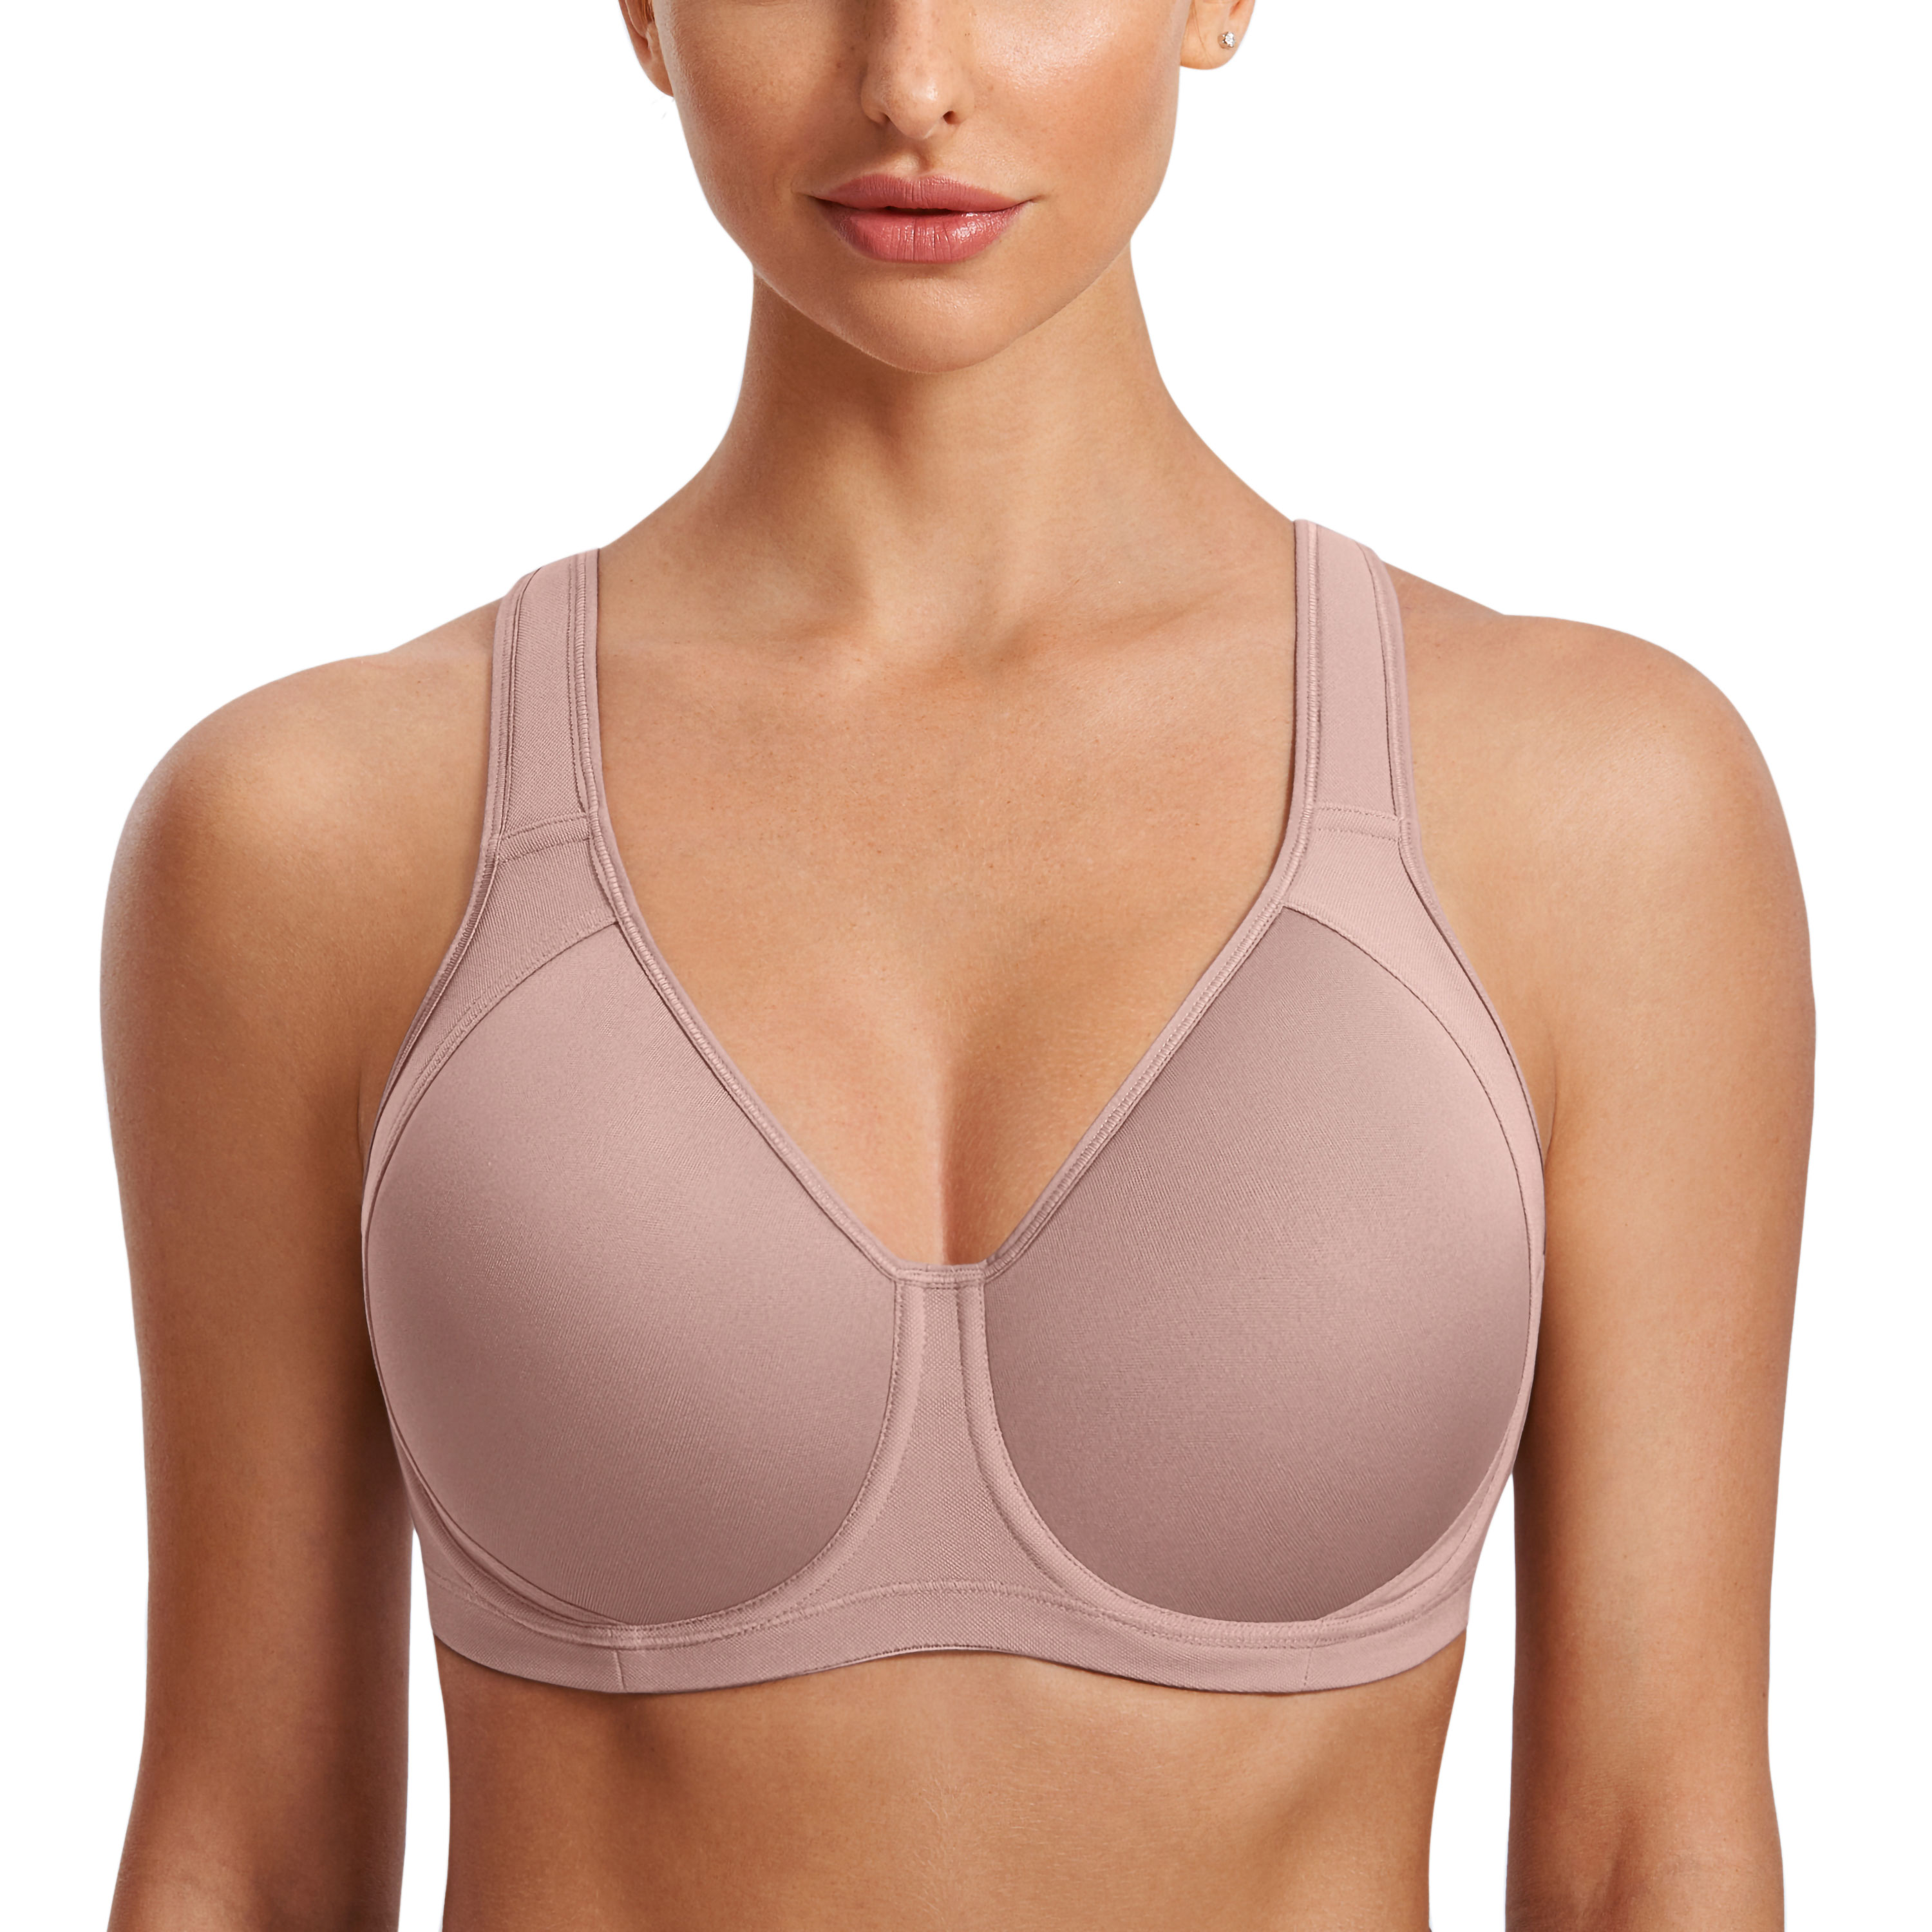 SYROKAN High Impact Sports Bra Support Underwire Racerback Large Bust Molded  Cup